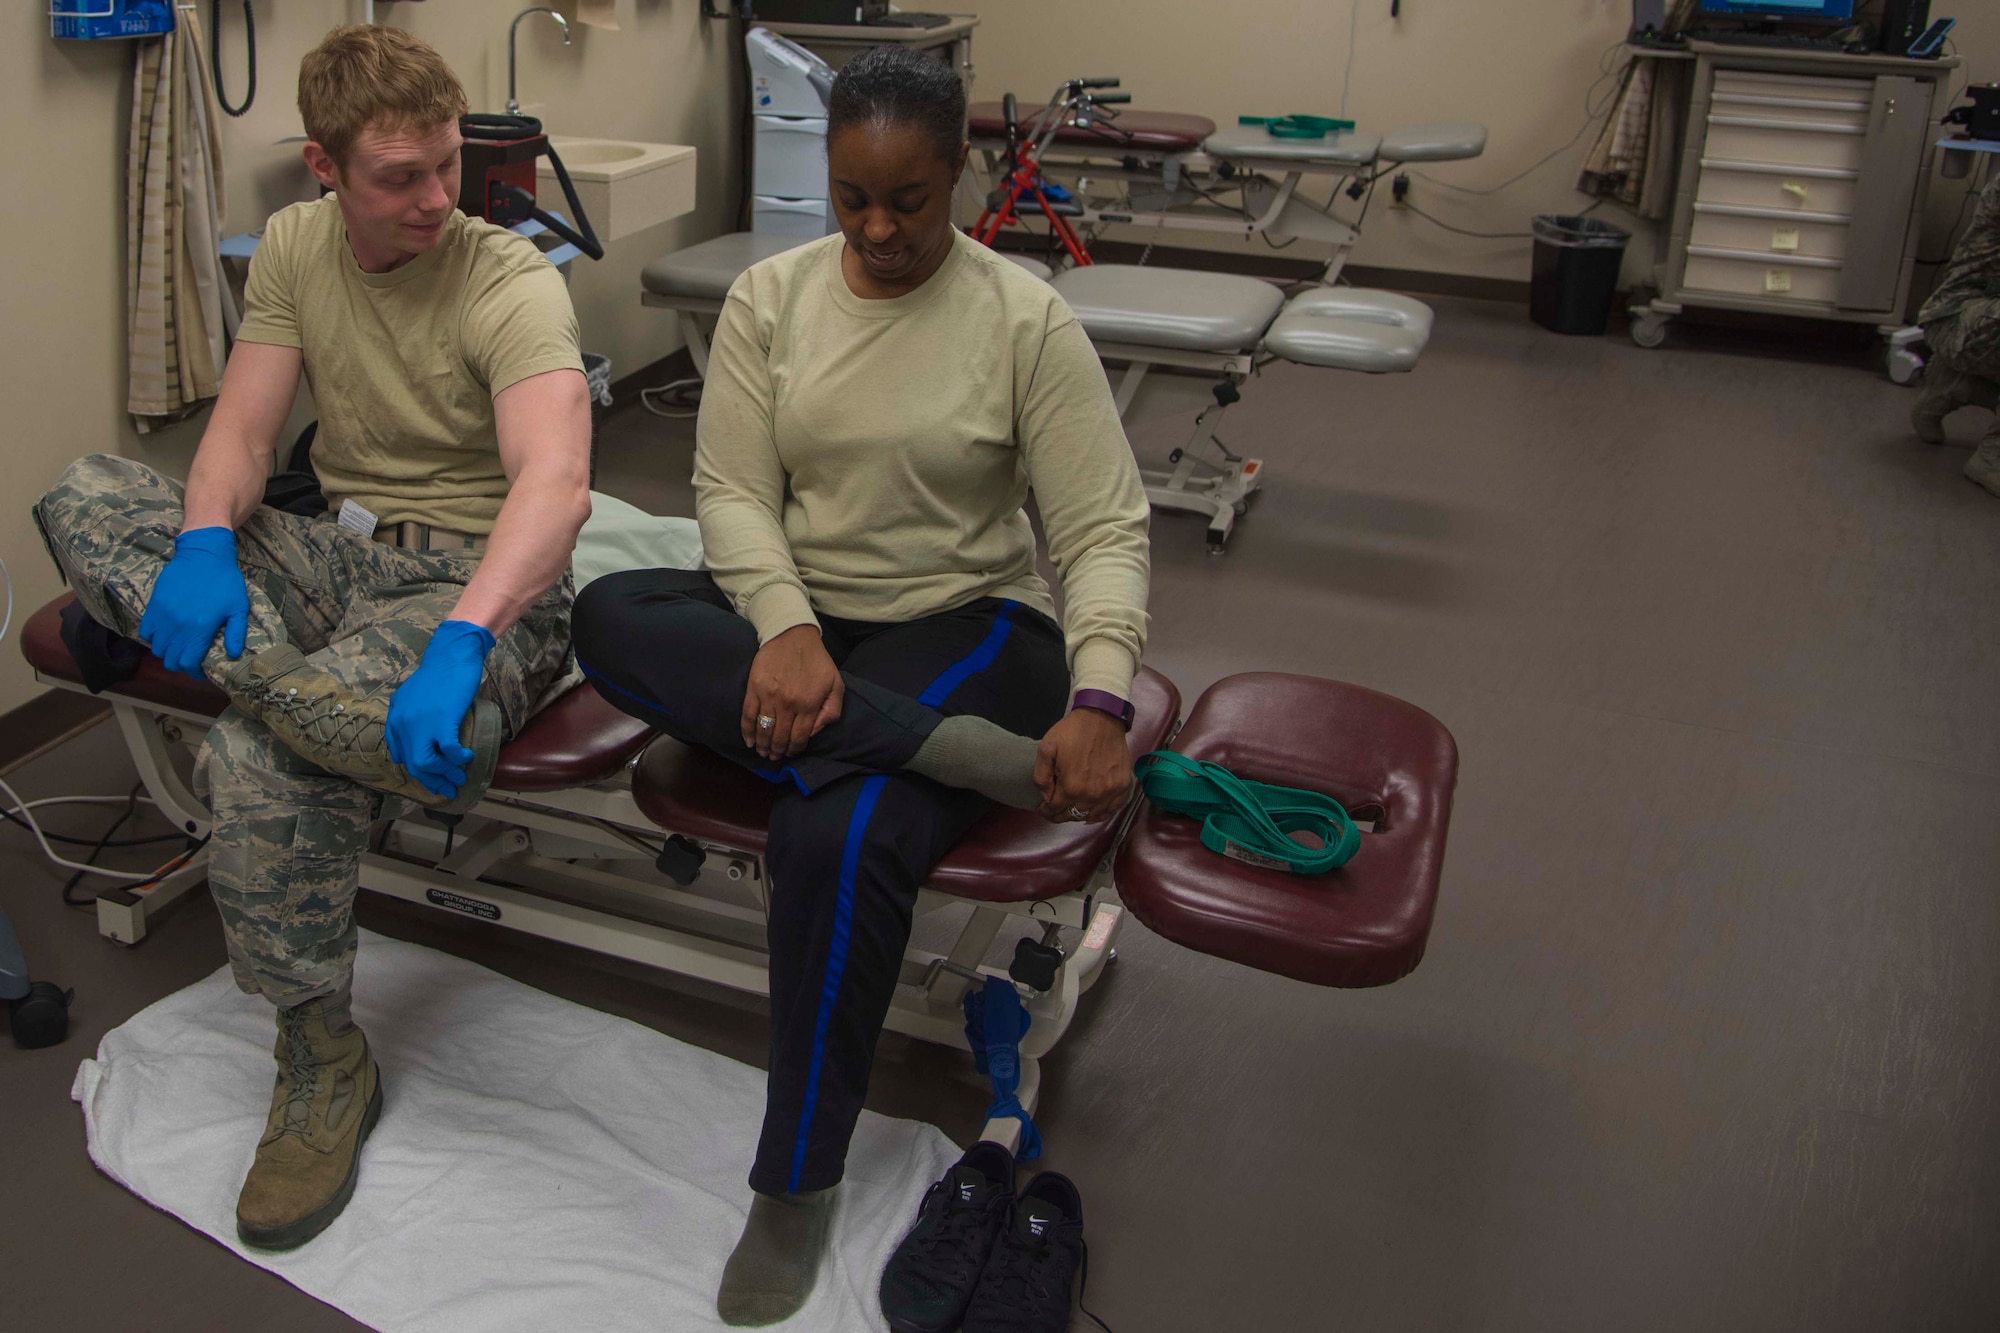 Staff Sgt. Kivynn Pabst, left, 779th Medical Group physical medicine technician, performs a stretch with Master Sgt. Christina Chislom, right, Malcolm Grow Medical Center patient, during a physical therapy appointment at Joint Base Andrews, Md., Feb. 2, 2017. Pabst gives Chislom treatment based on her unique needs.  (U.S. Air Force photo by Airman 1st Class Valentina Lopez)